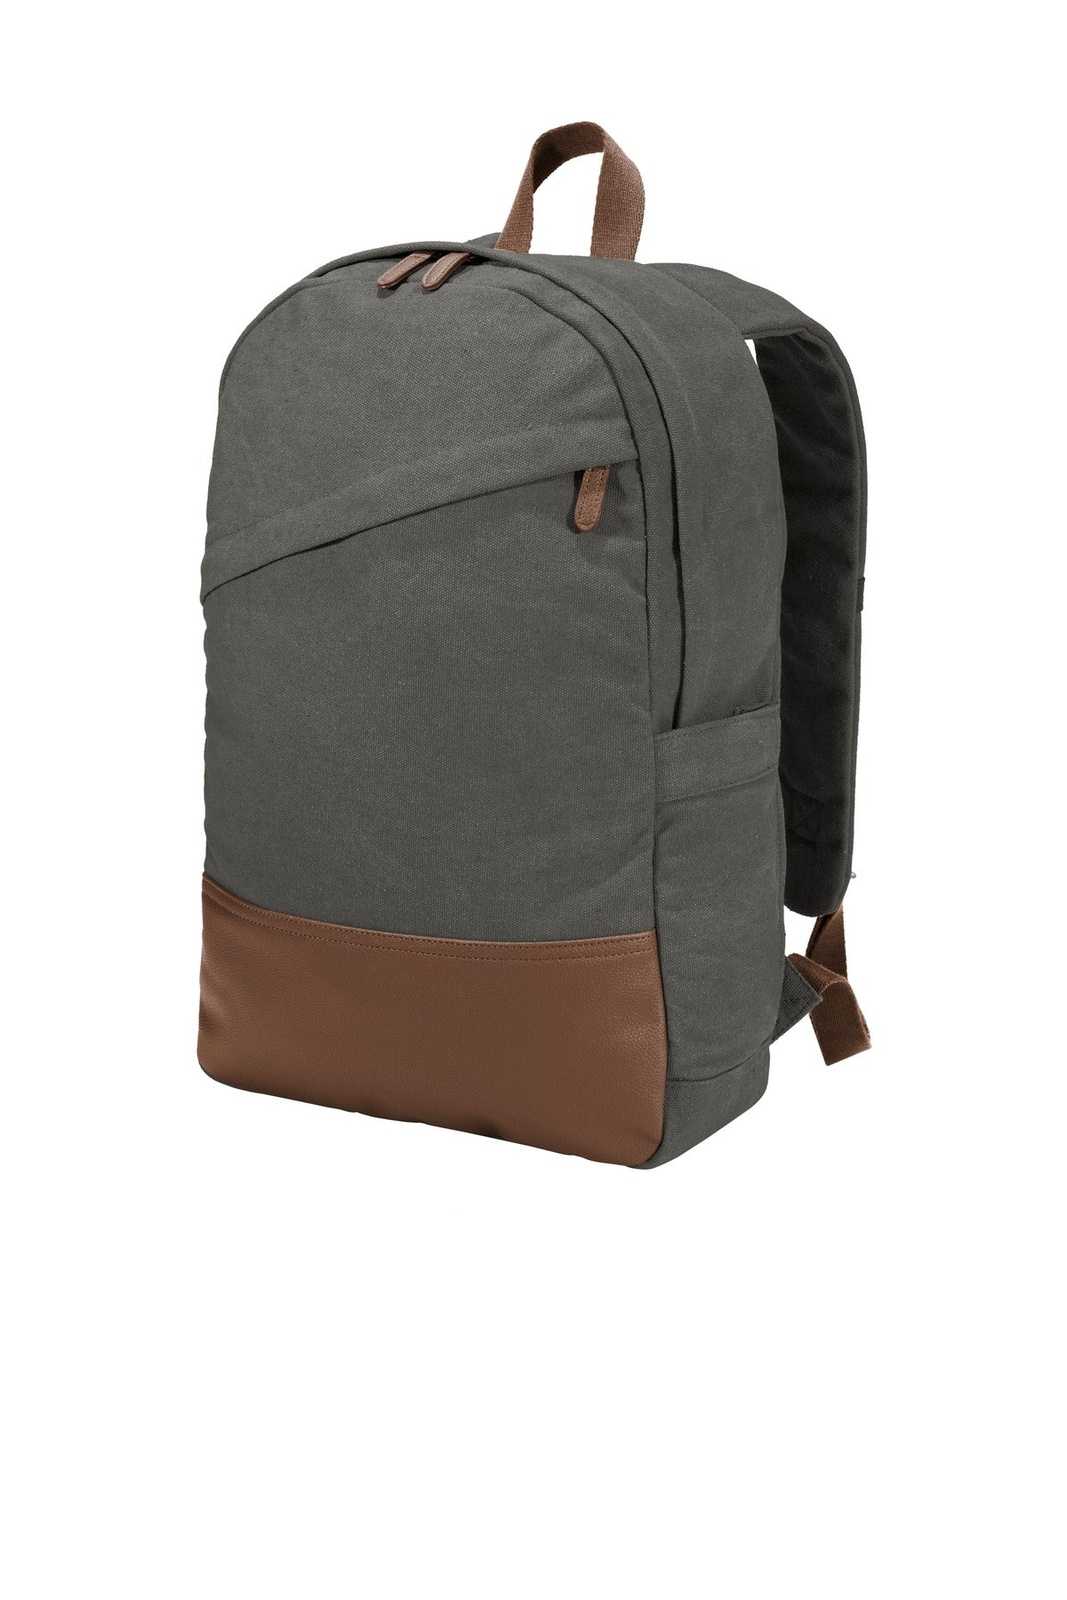 Port Authority BG210 Cotton Canvas Backpack - Dark Smoke Gray - HIT a Double - 1